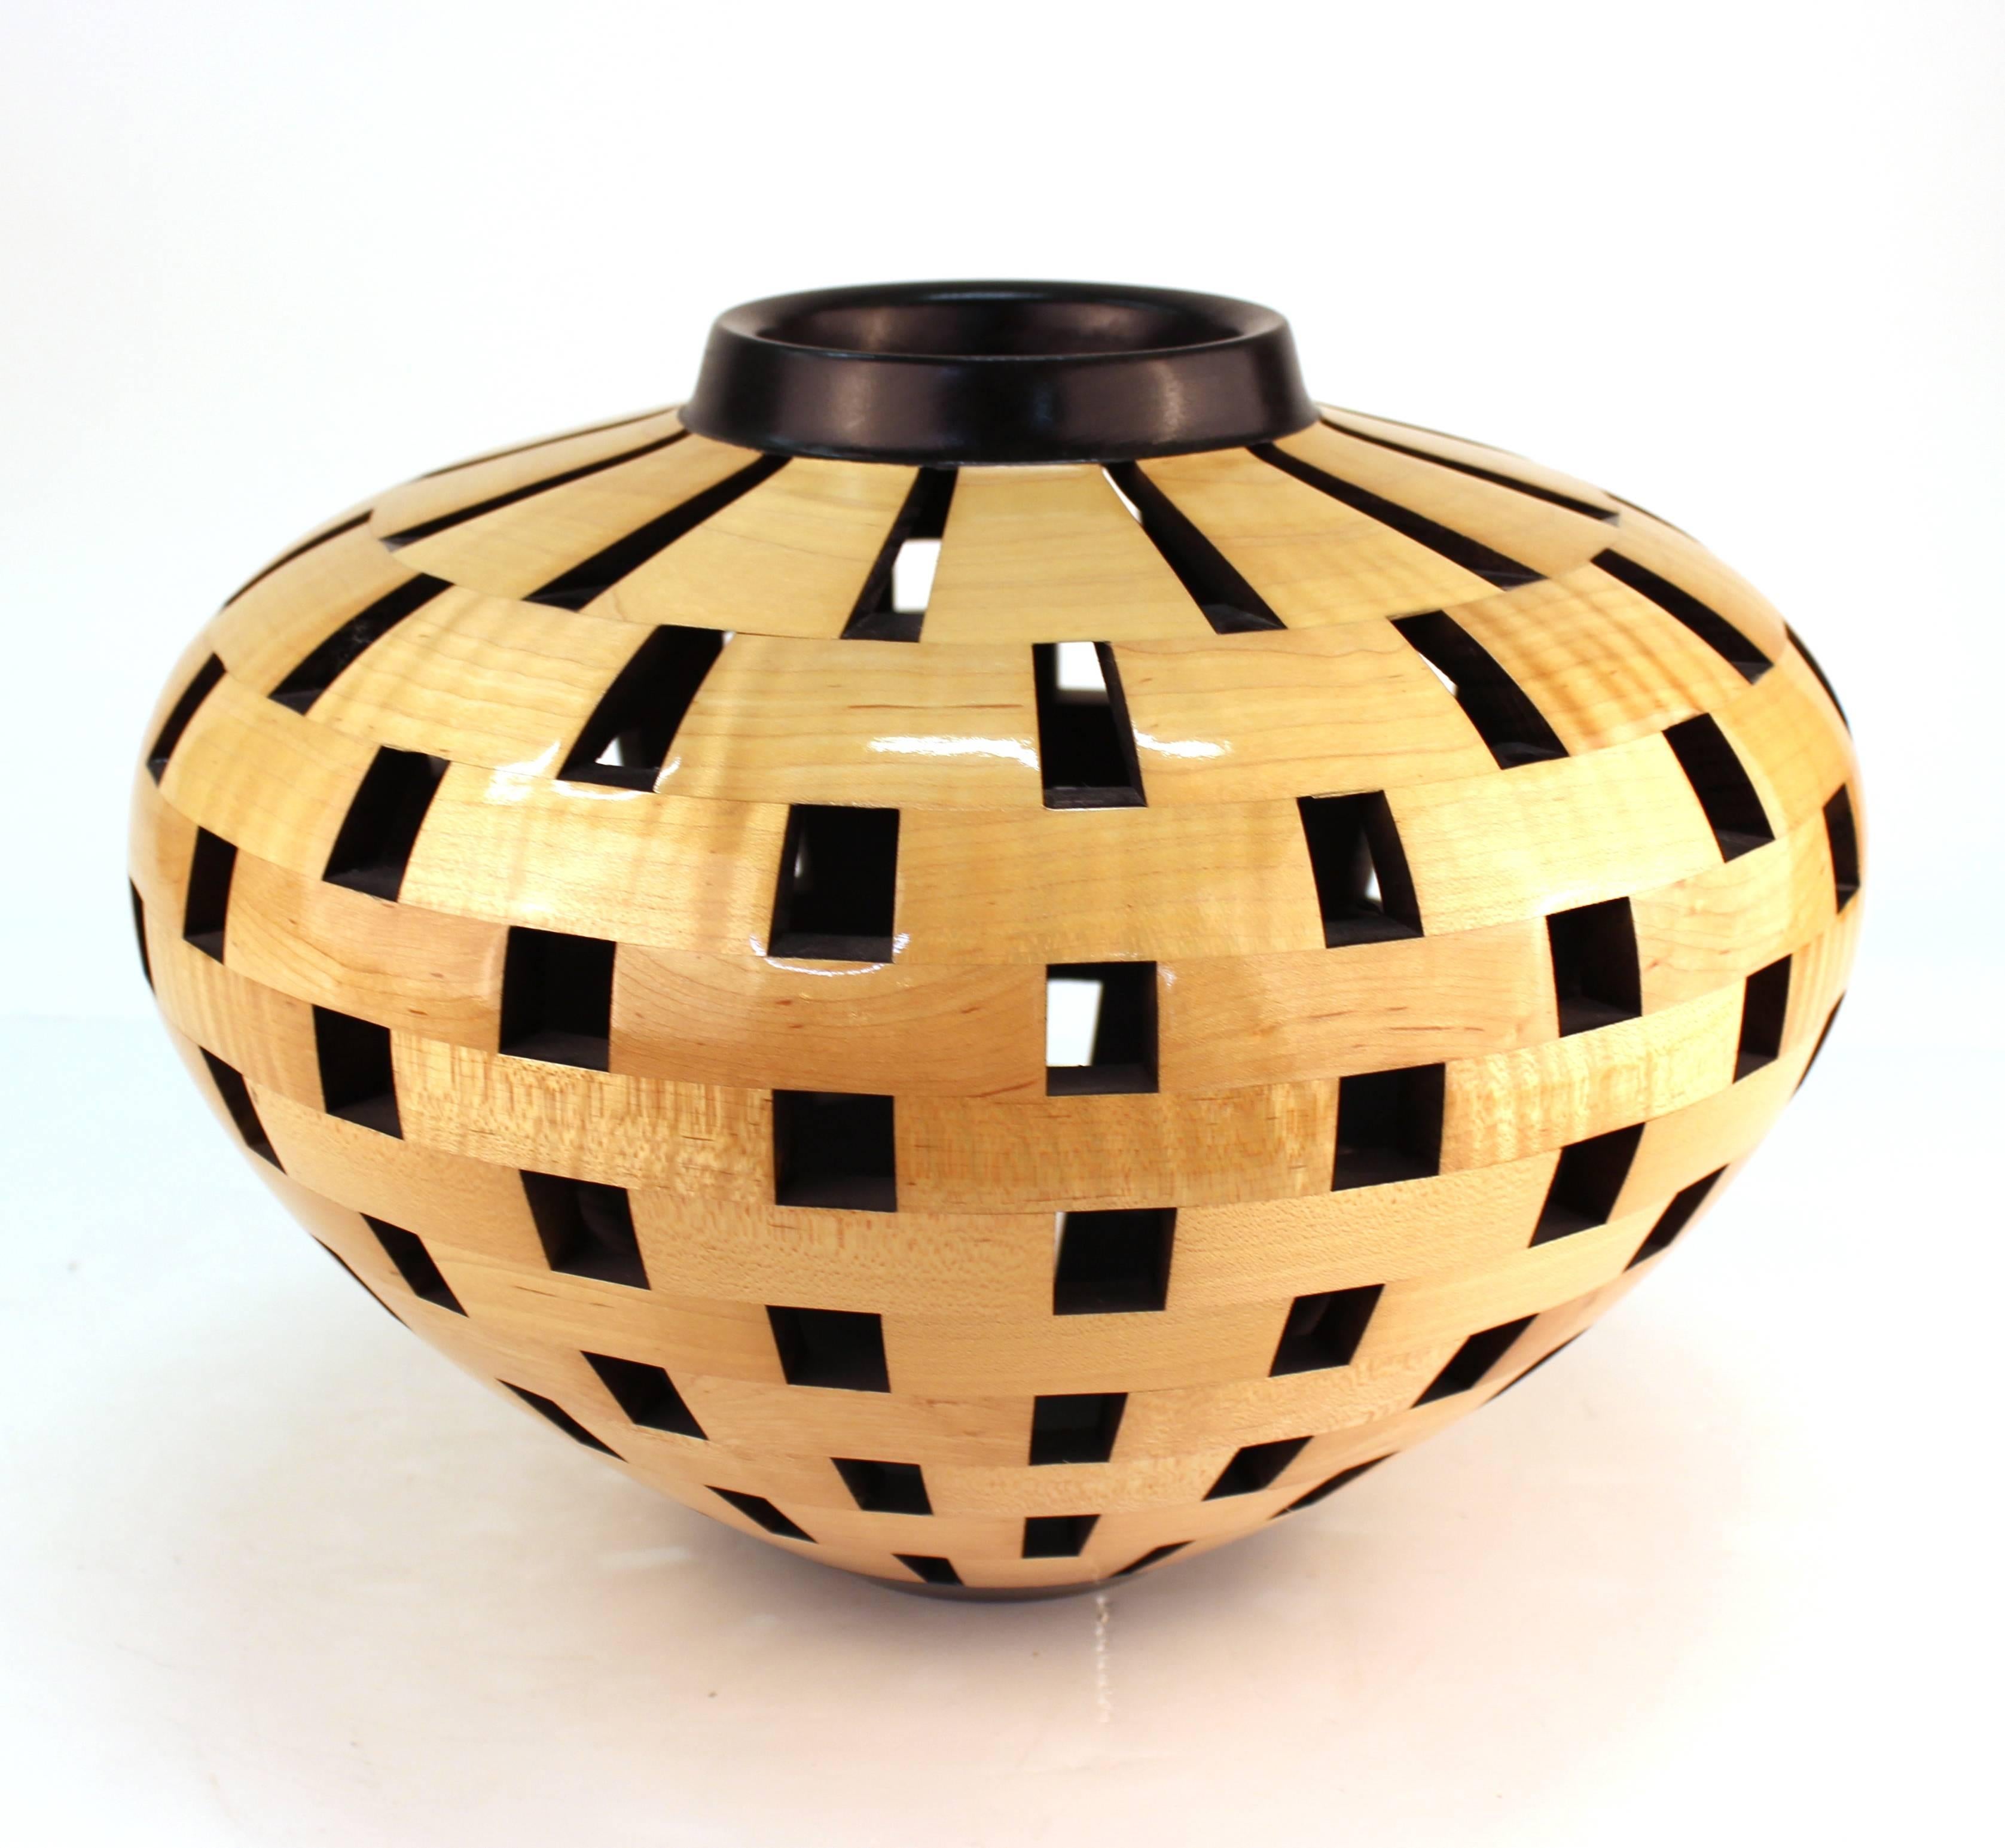 A segmented wooden lacquered vessel, made by Joel Hunnicutt. The piece is signed on the bottom and is in great condition.